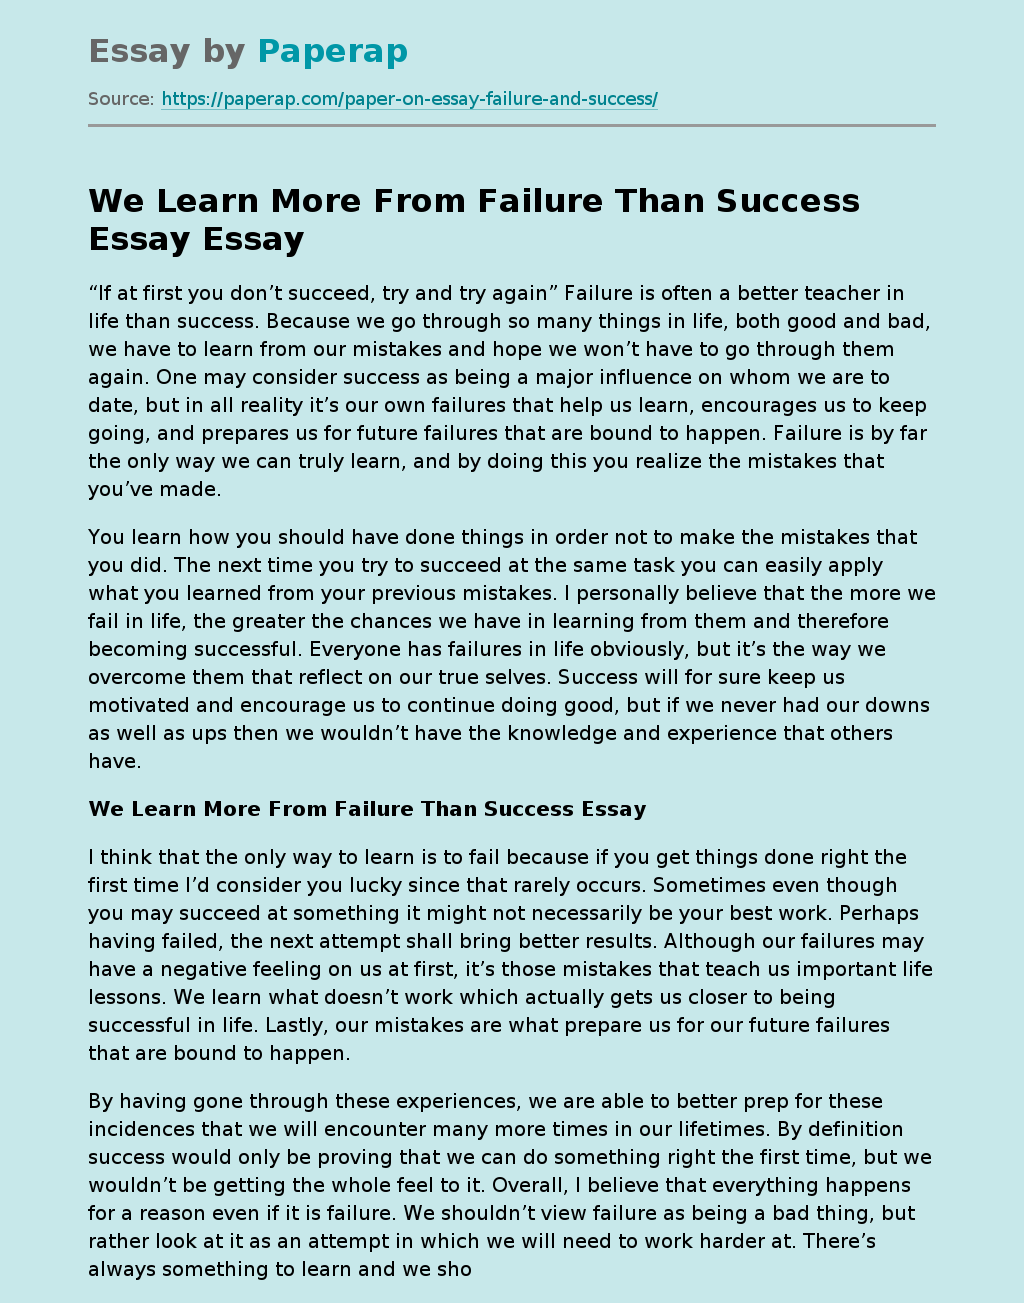 We Learn More From Failure Than Success Essay